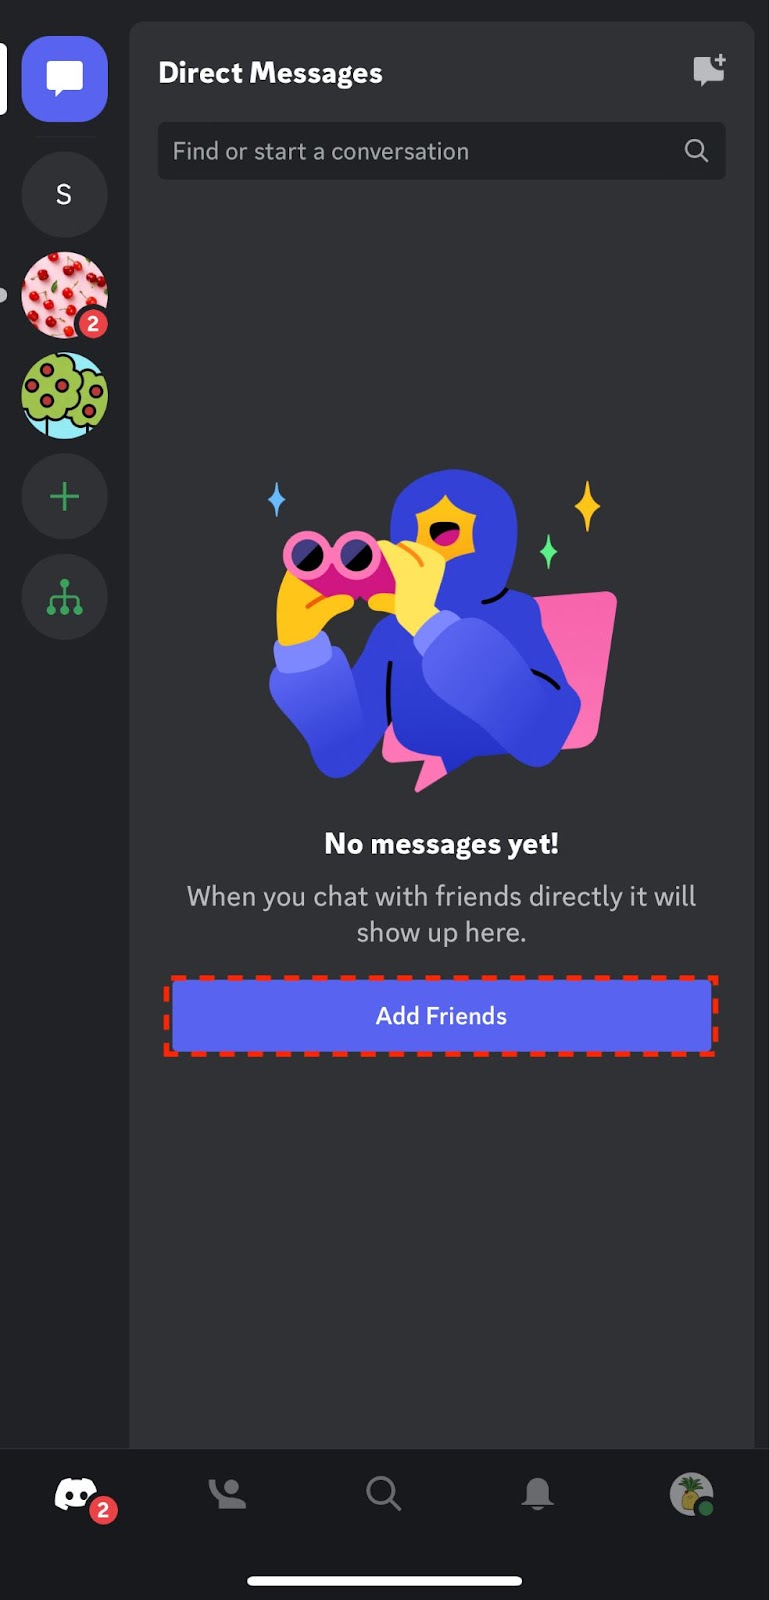 How to Add Friends on Discord: PC, Mac, iPhone, Android